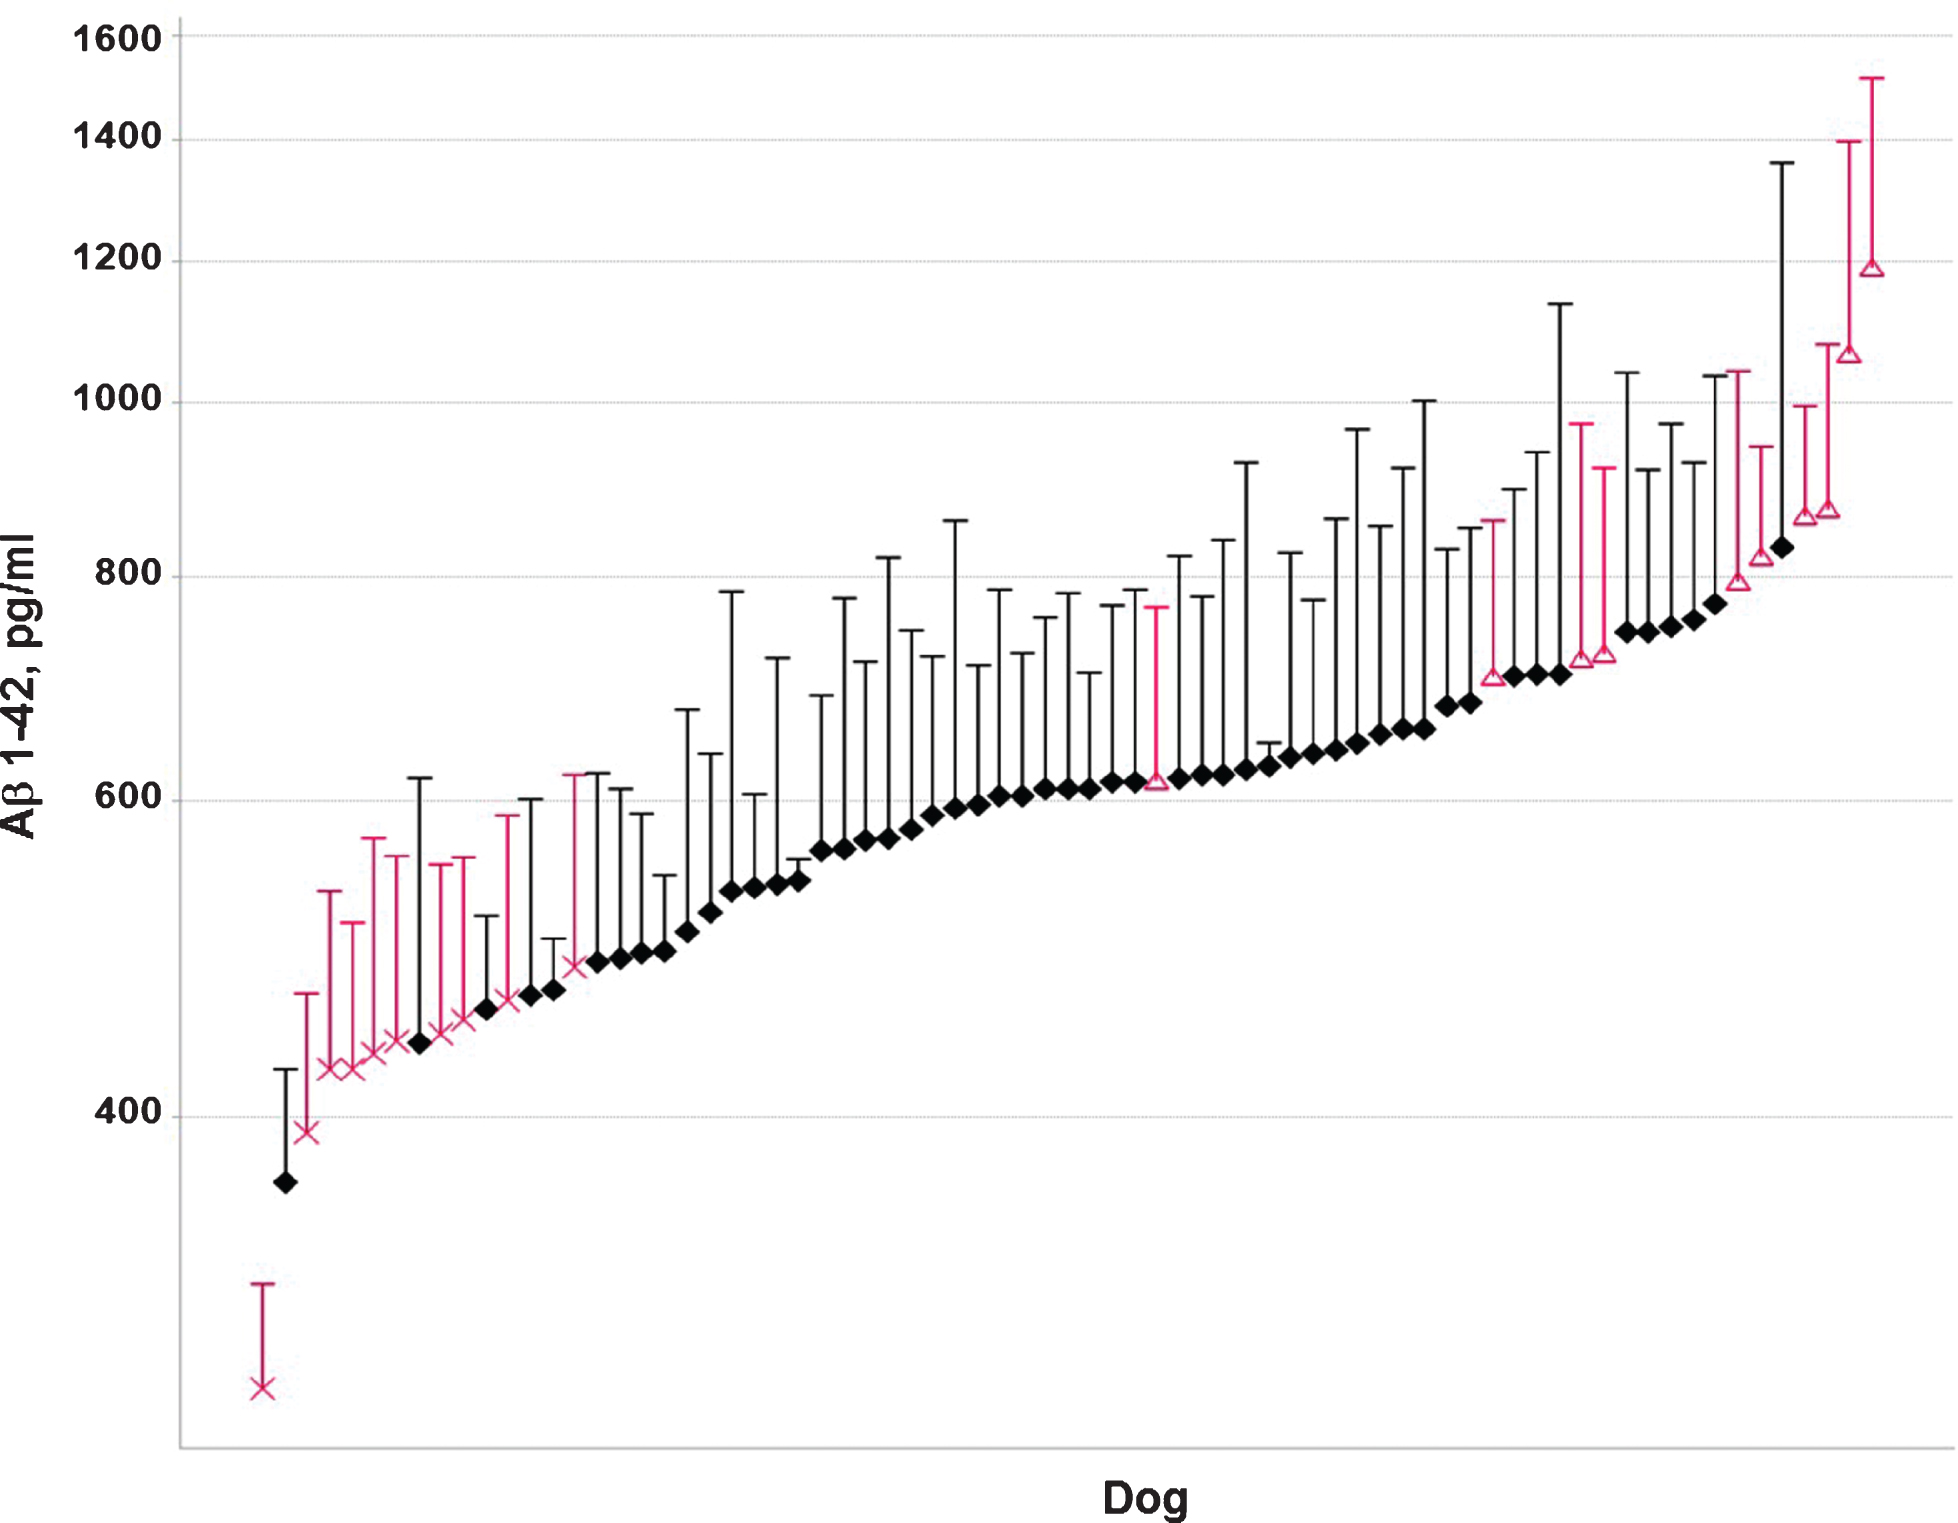 Mean (+SD) Aβ42 CSF concentrations (pg/ml) of individual animals over a period of two years in the larger colony of dogs (n = 73). Animals selected for the low and high Aβ42 subgroups are indicated in grey.